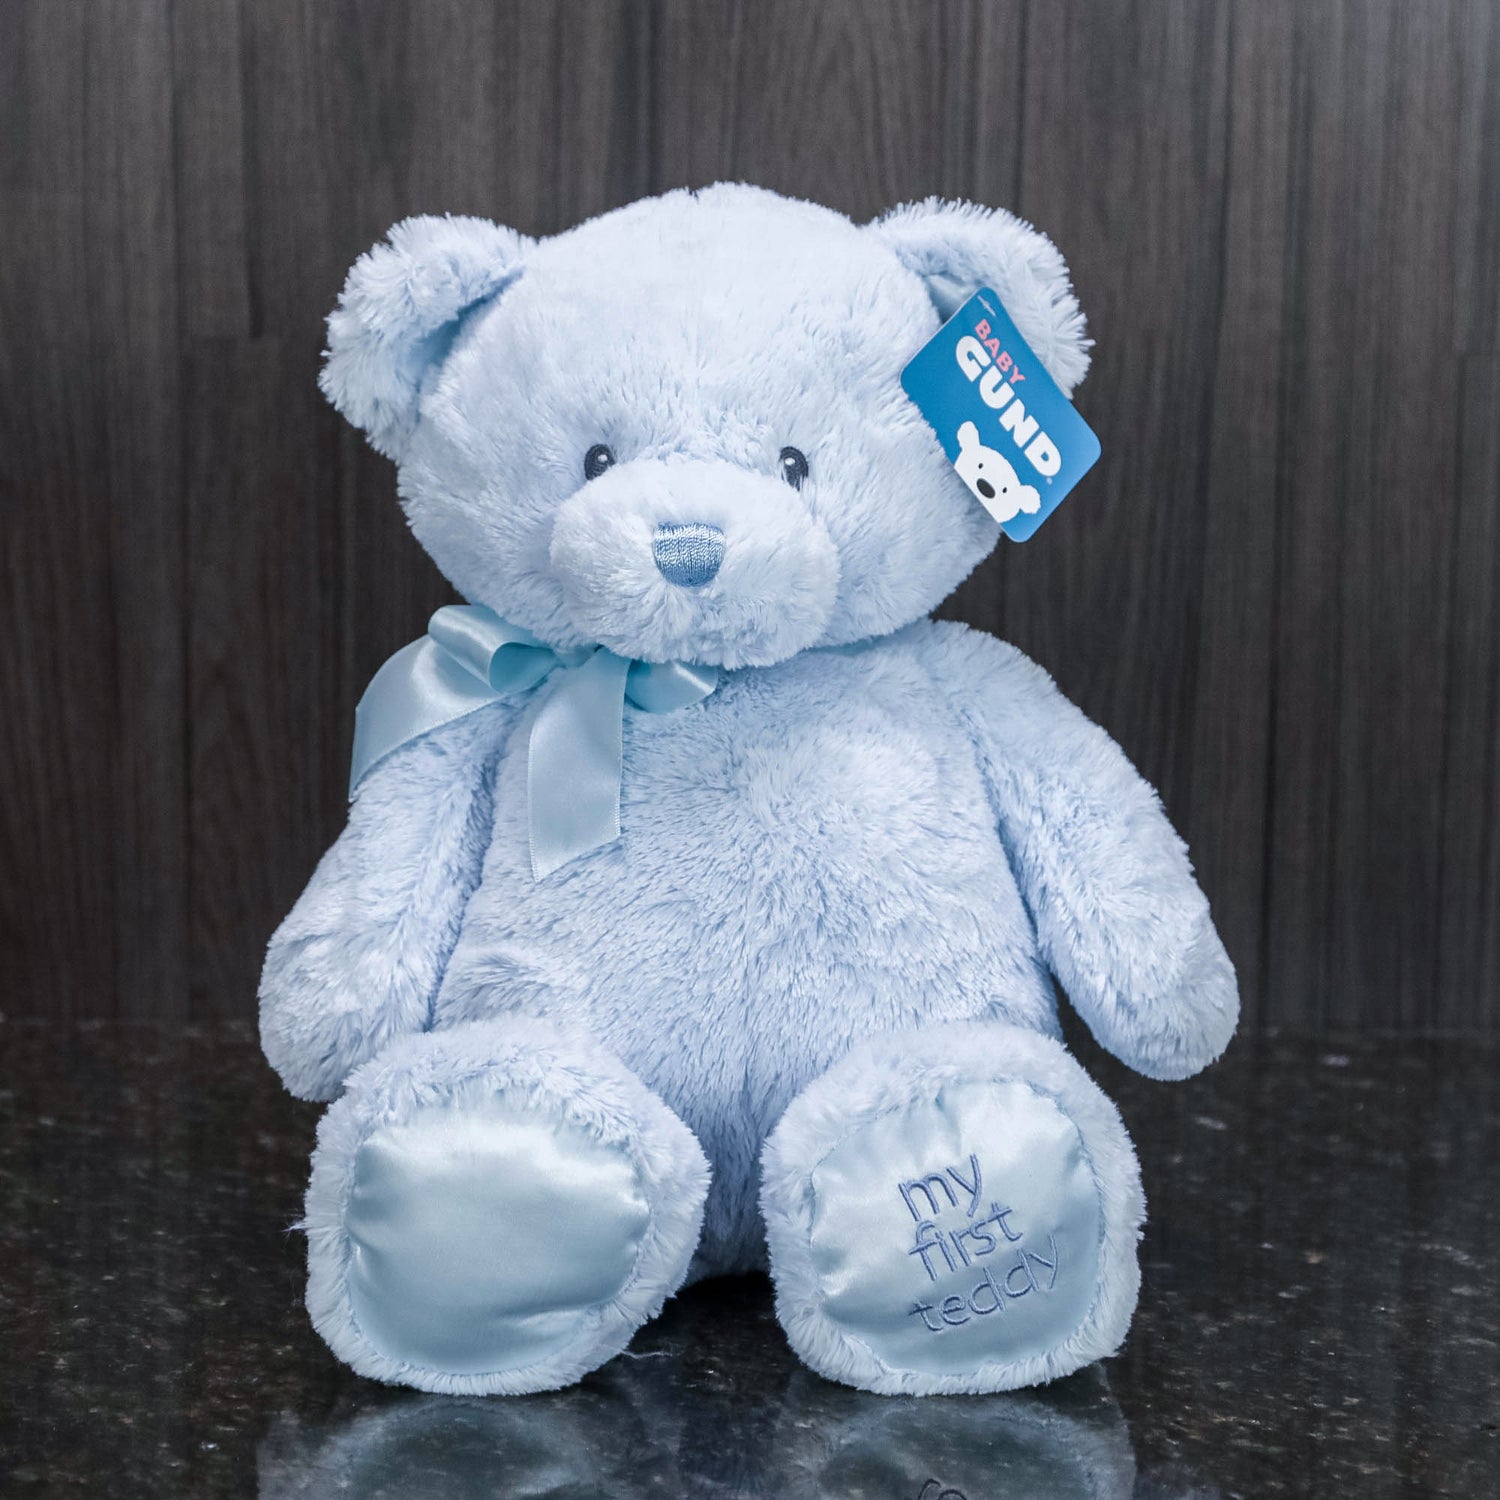 a blue teddy bear with "my first teddy" embroidered on its foot